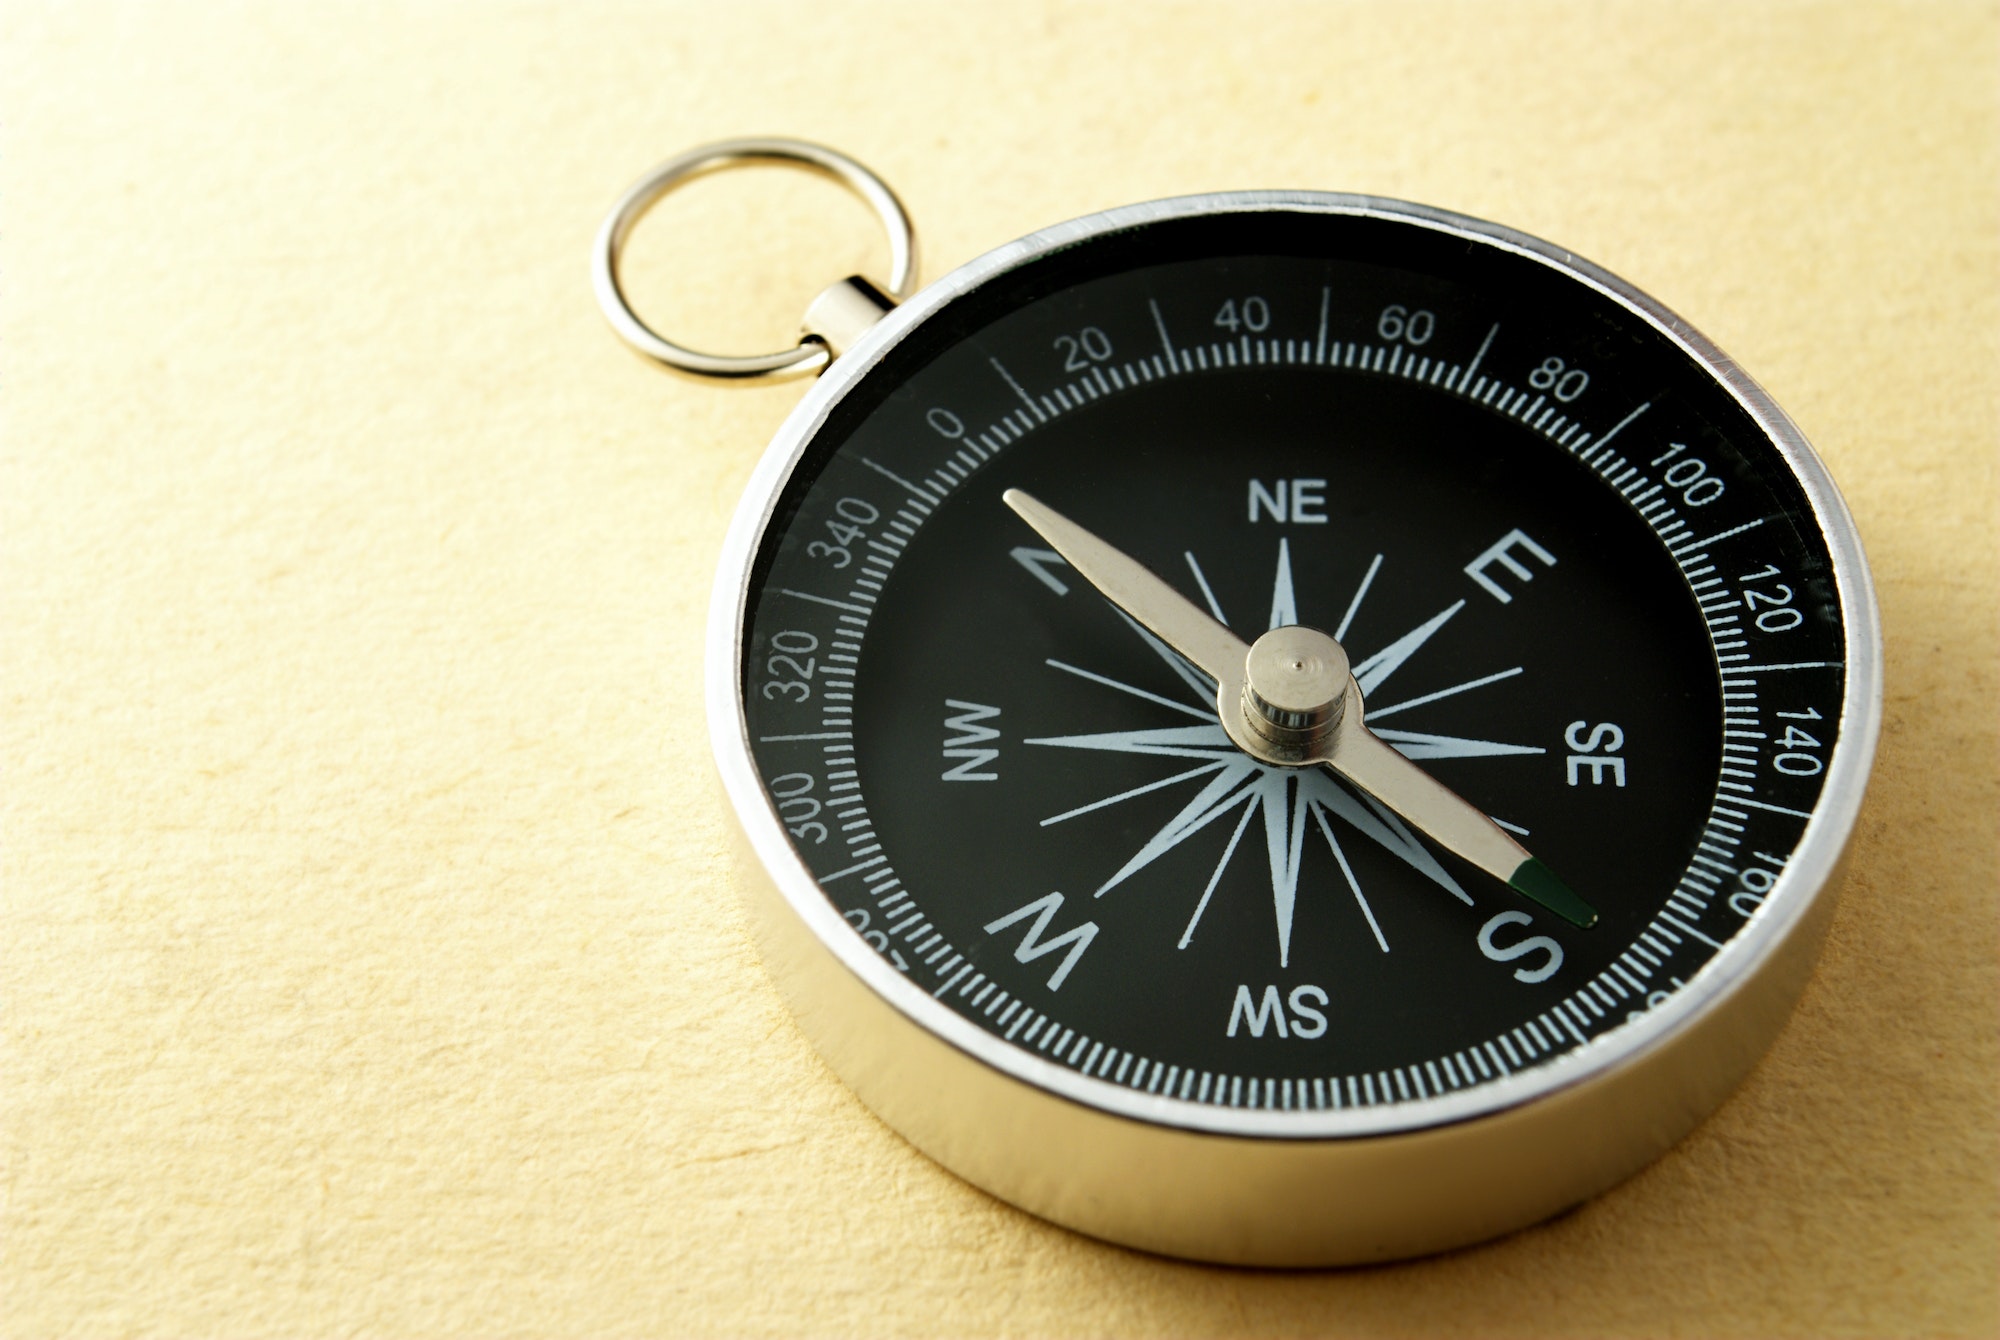 Why Does A Compass Always Point North?